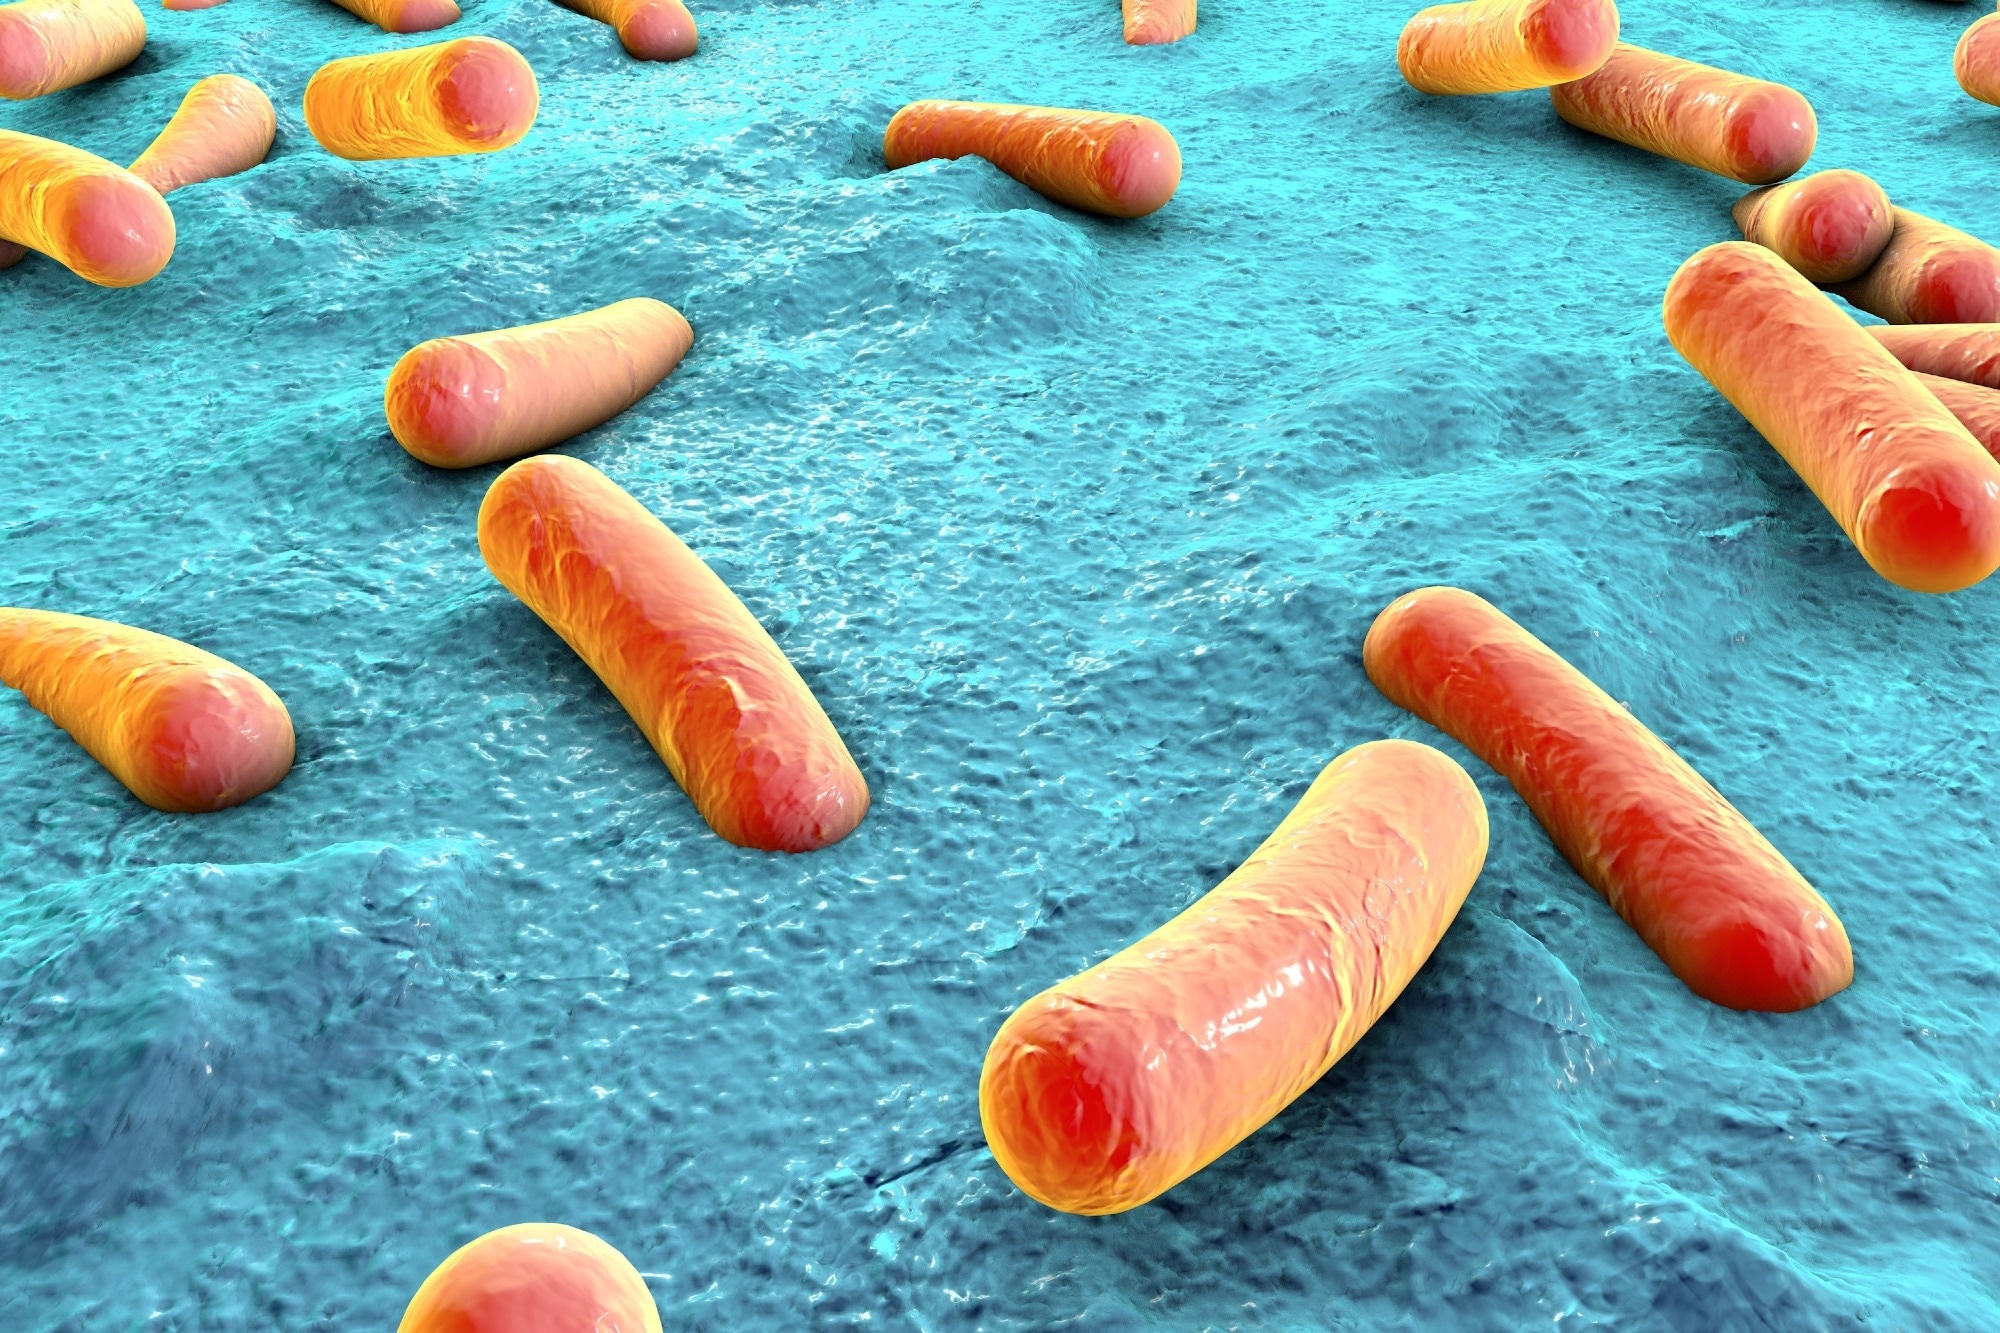 Study: Human microbiome transfer in the built environment differs based on occupants, objects, and buildings. Image Credit: Kateryna Kon / Shutterstock.com